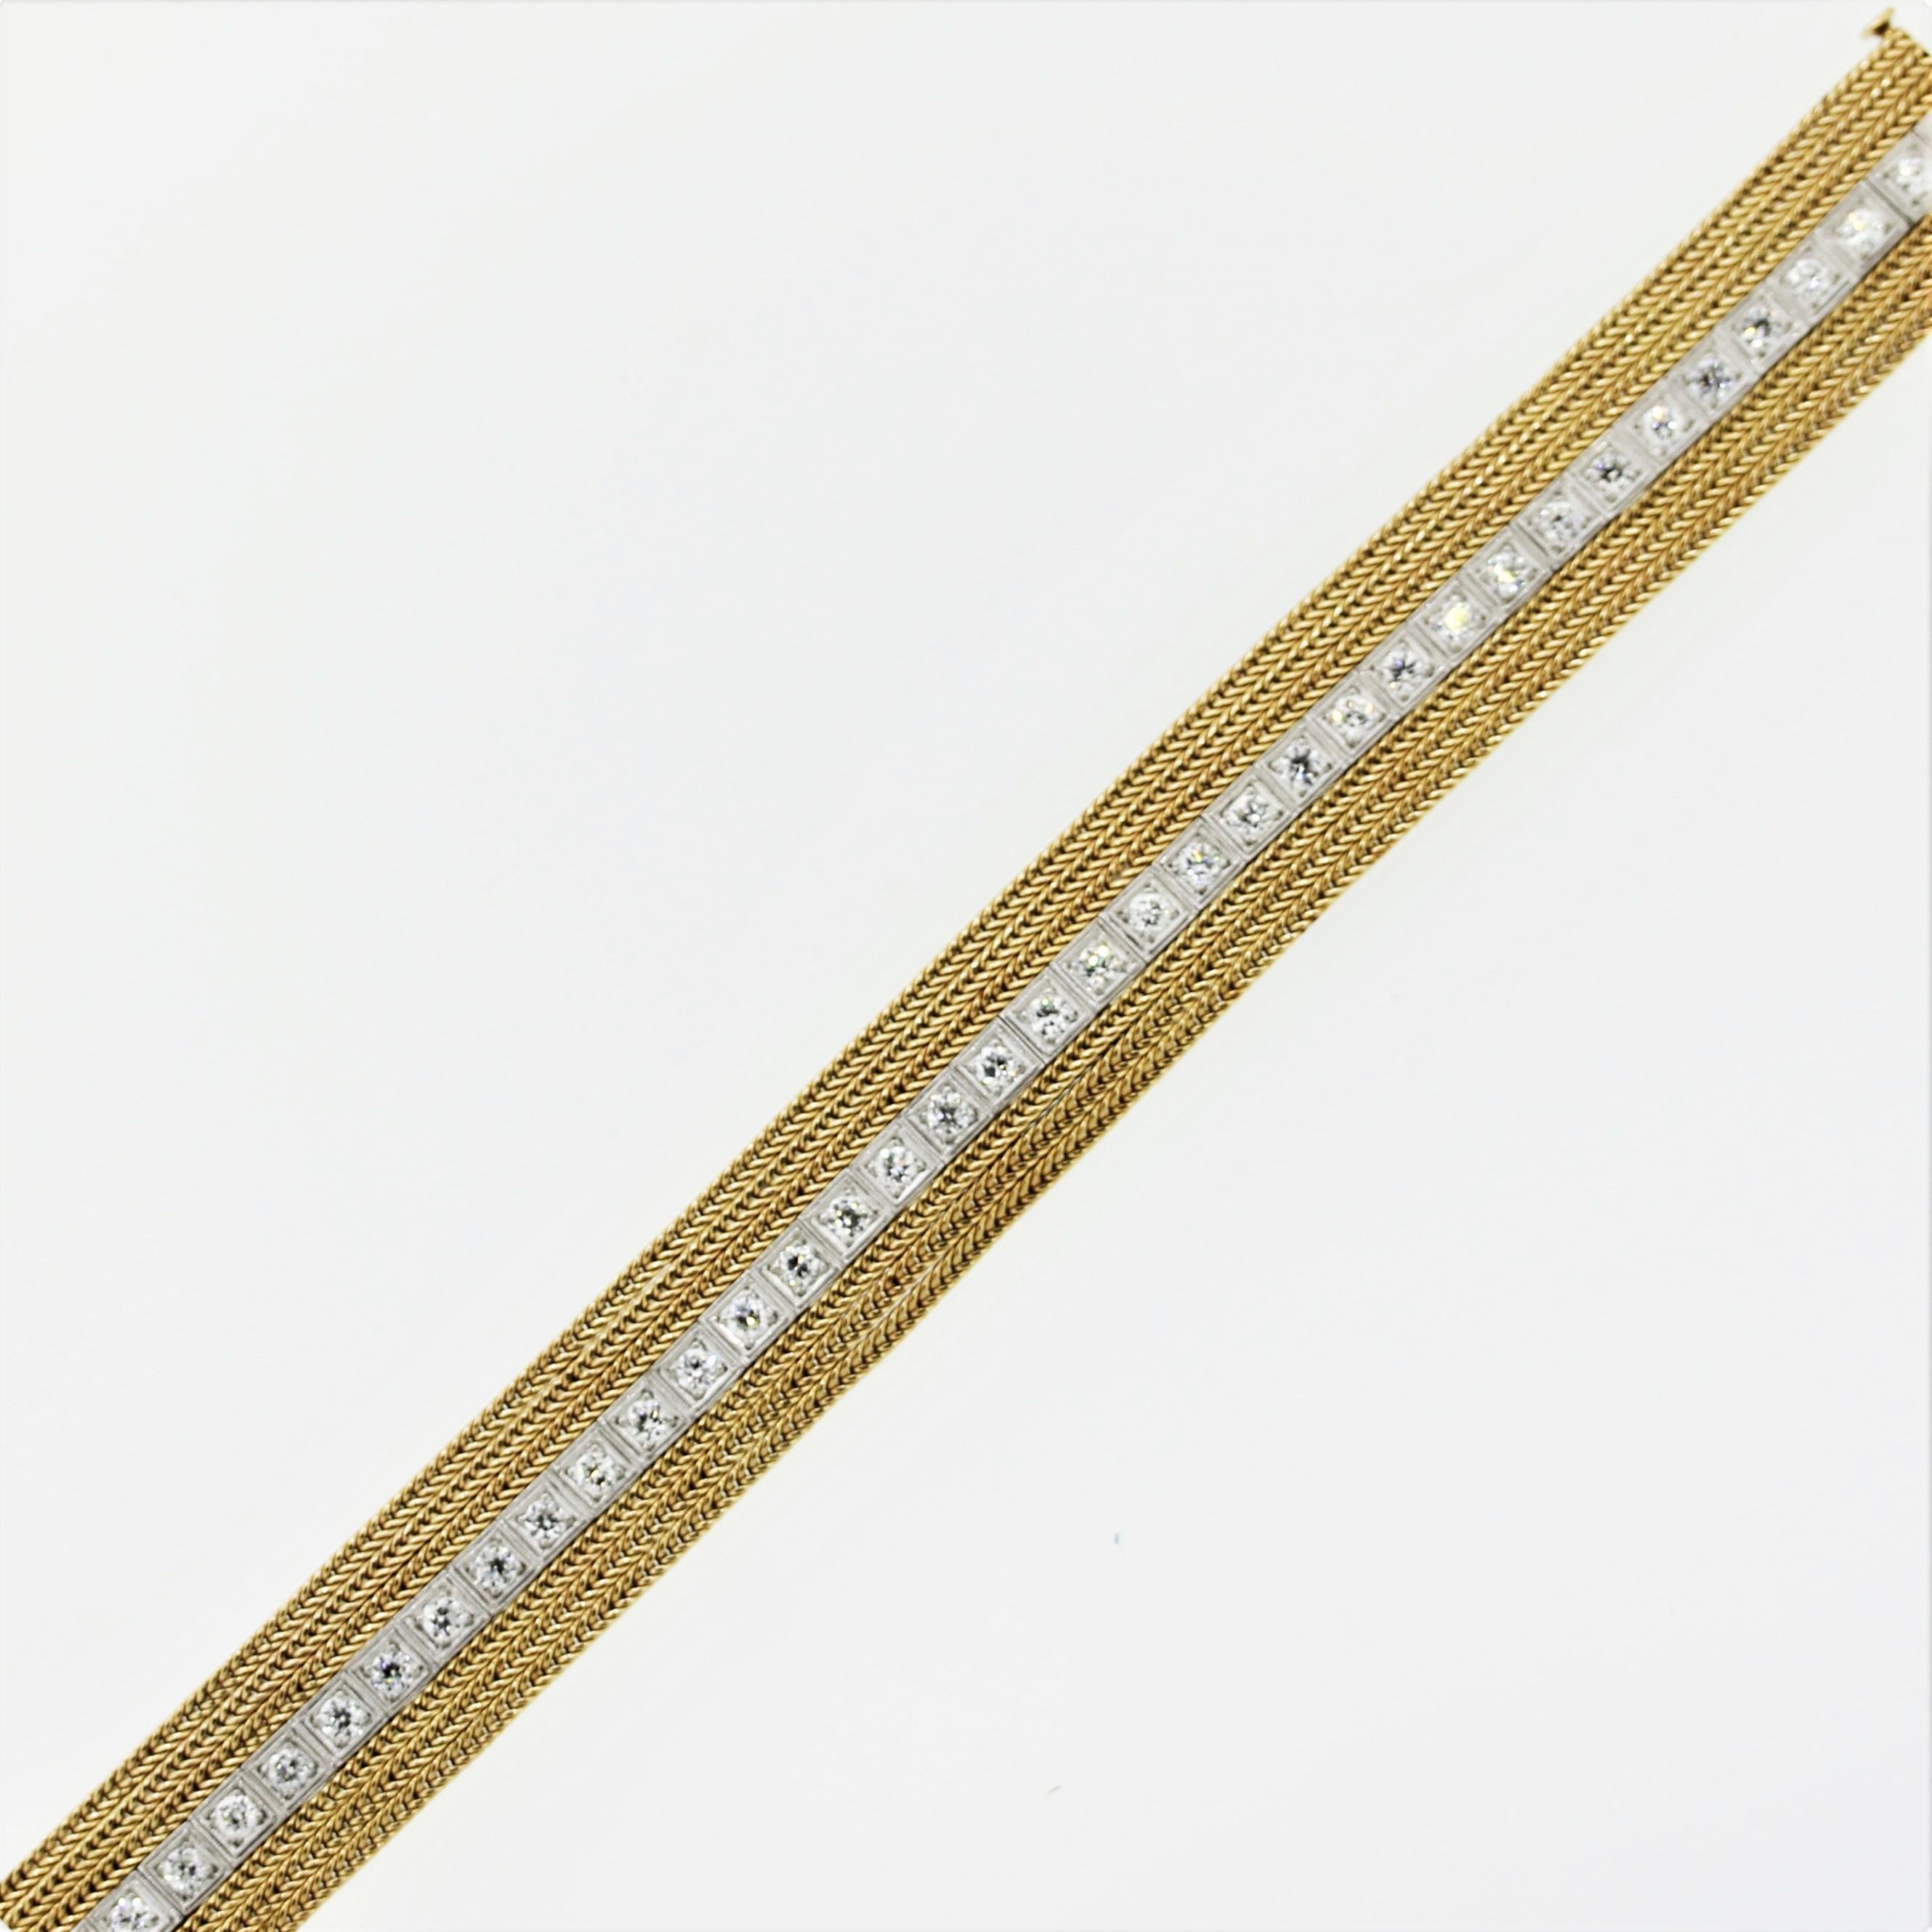 An original antique platinum diamond line bracelet that has been modified years later with braided gold additions. The bracelet features 2.75 carats of European-cut diamonds set in platinum (antique portion) and rows of braided 14k yellow gold on